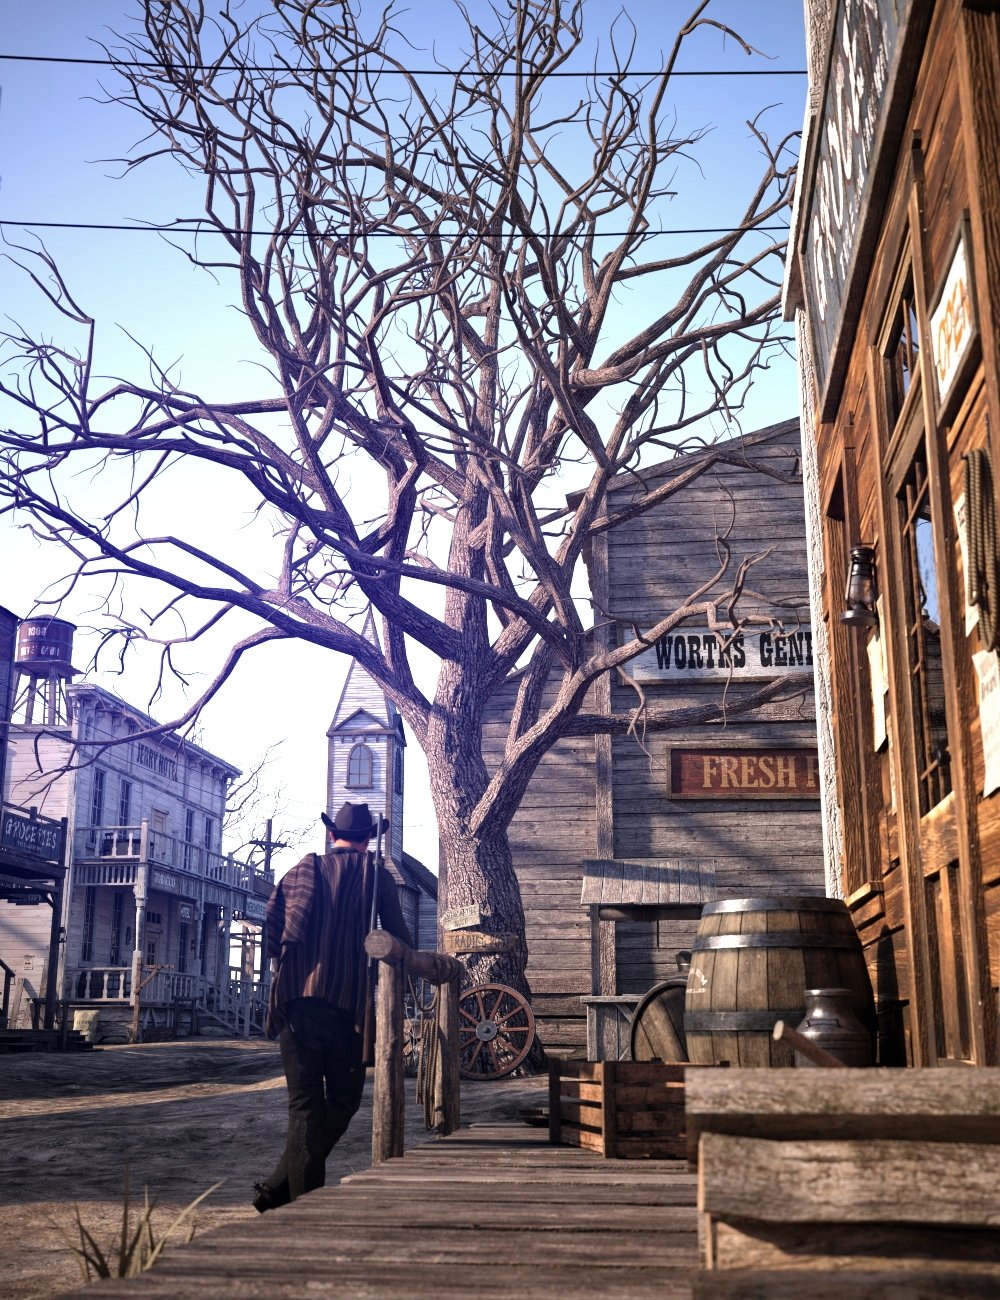 Wild West Town Center by: Charles, 3D Models by Daz 3D